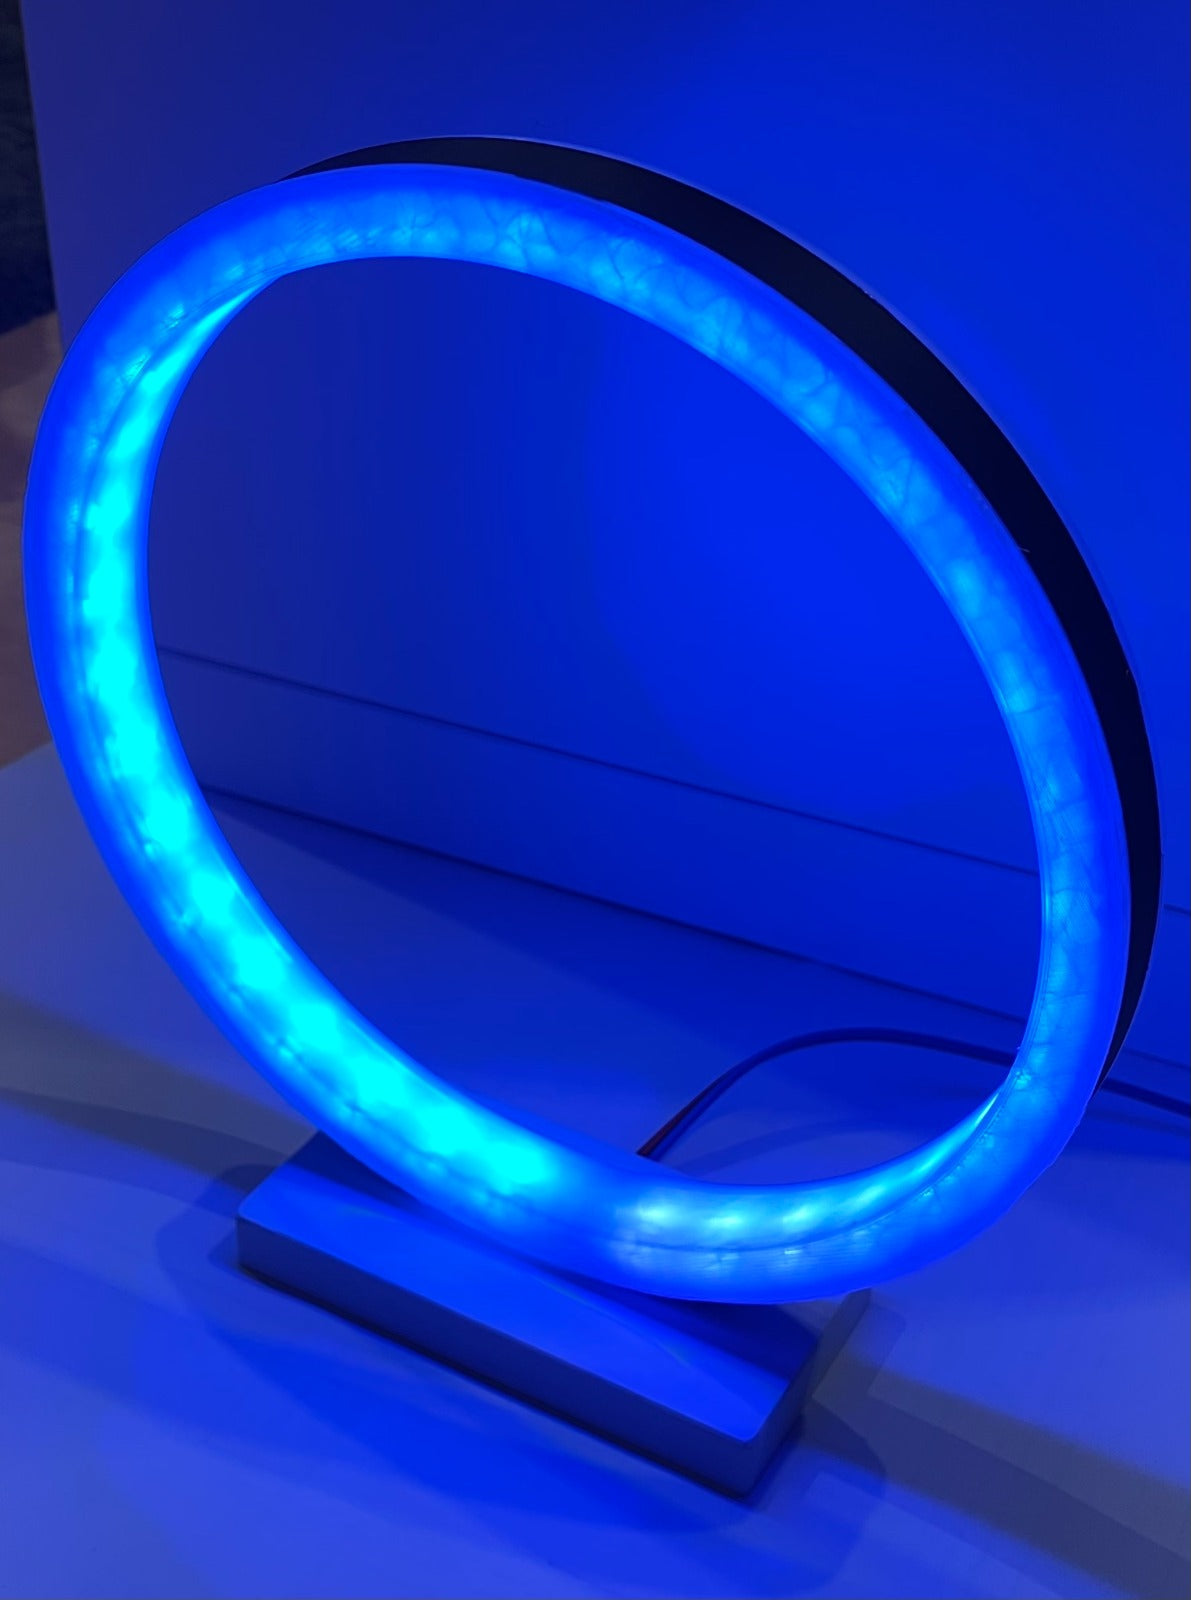 LED ring lamp for LED strips and control units